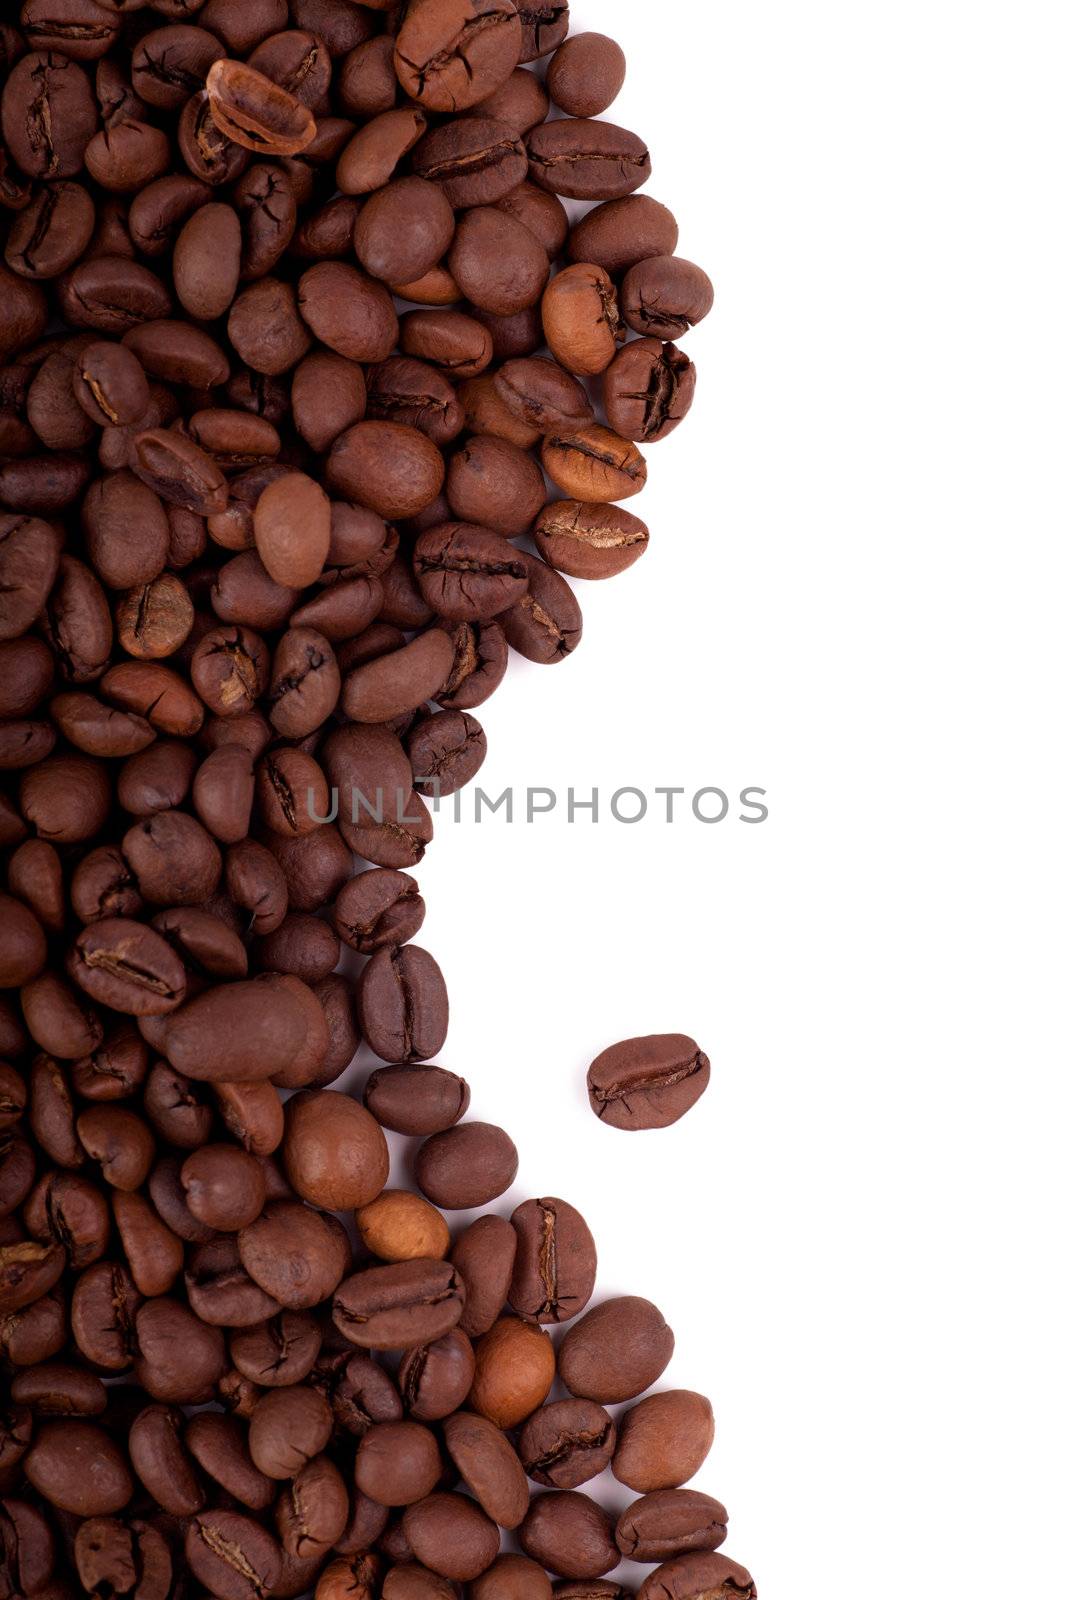 Coffee beans by AGorohov